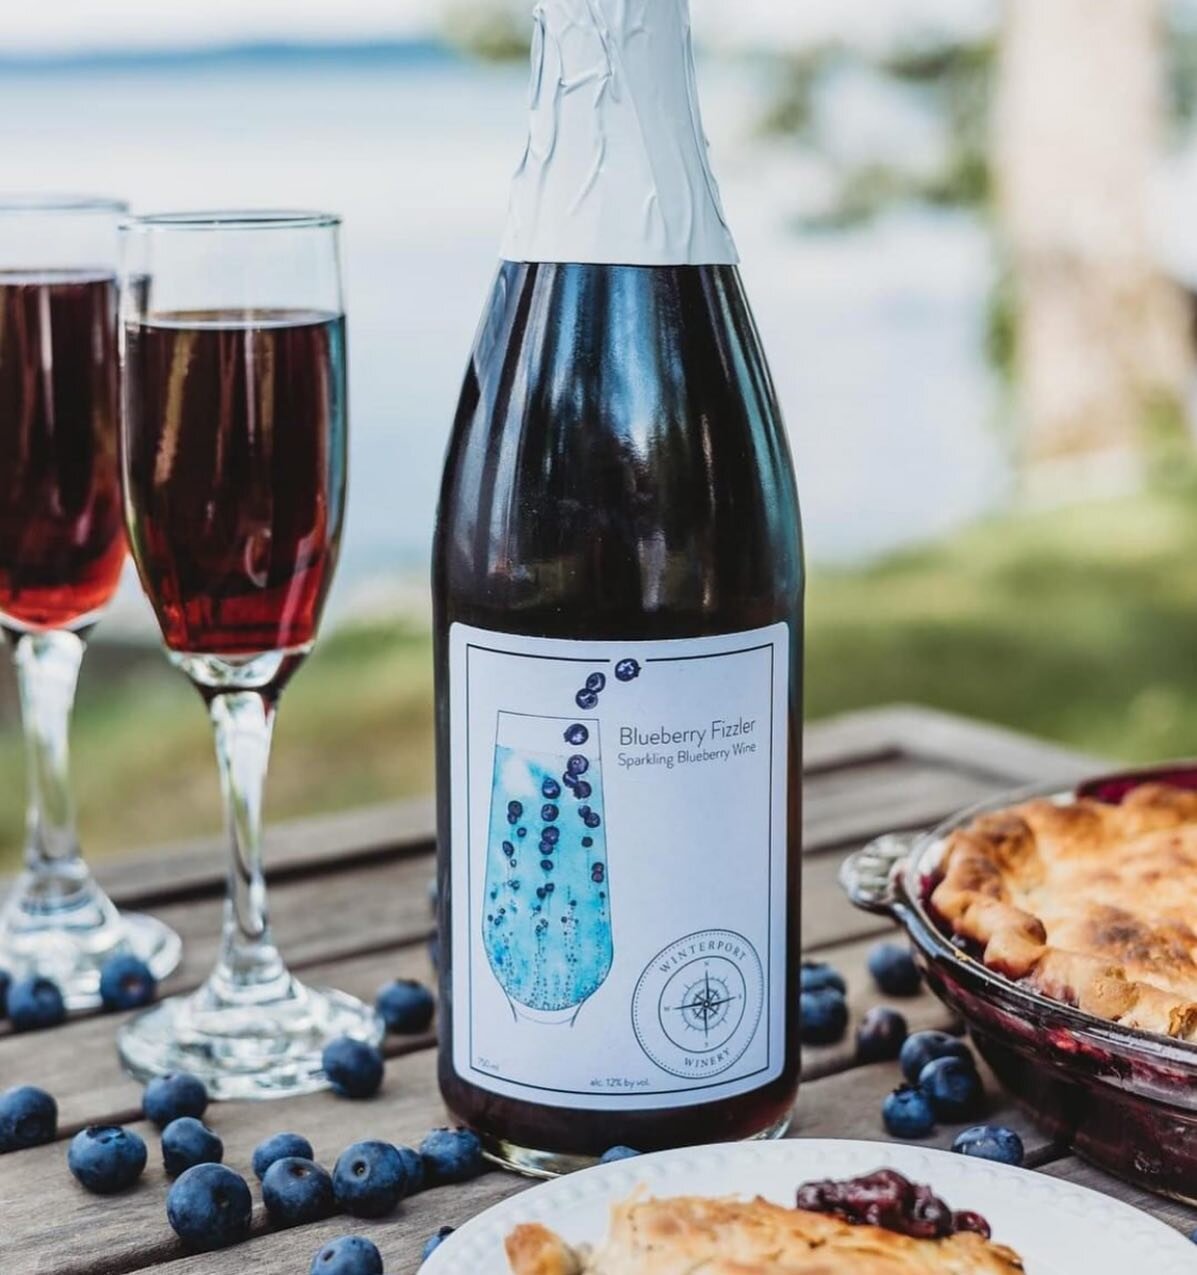 New Wine Alert 🚨 
Introducing our new sparkling wine, Blueberry Fizzler 🫐
A hint of blueberry and a sparkle of wine, perfect for summertime ✨